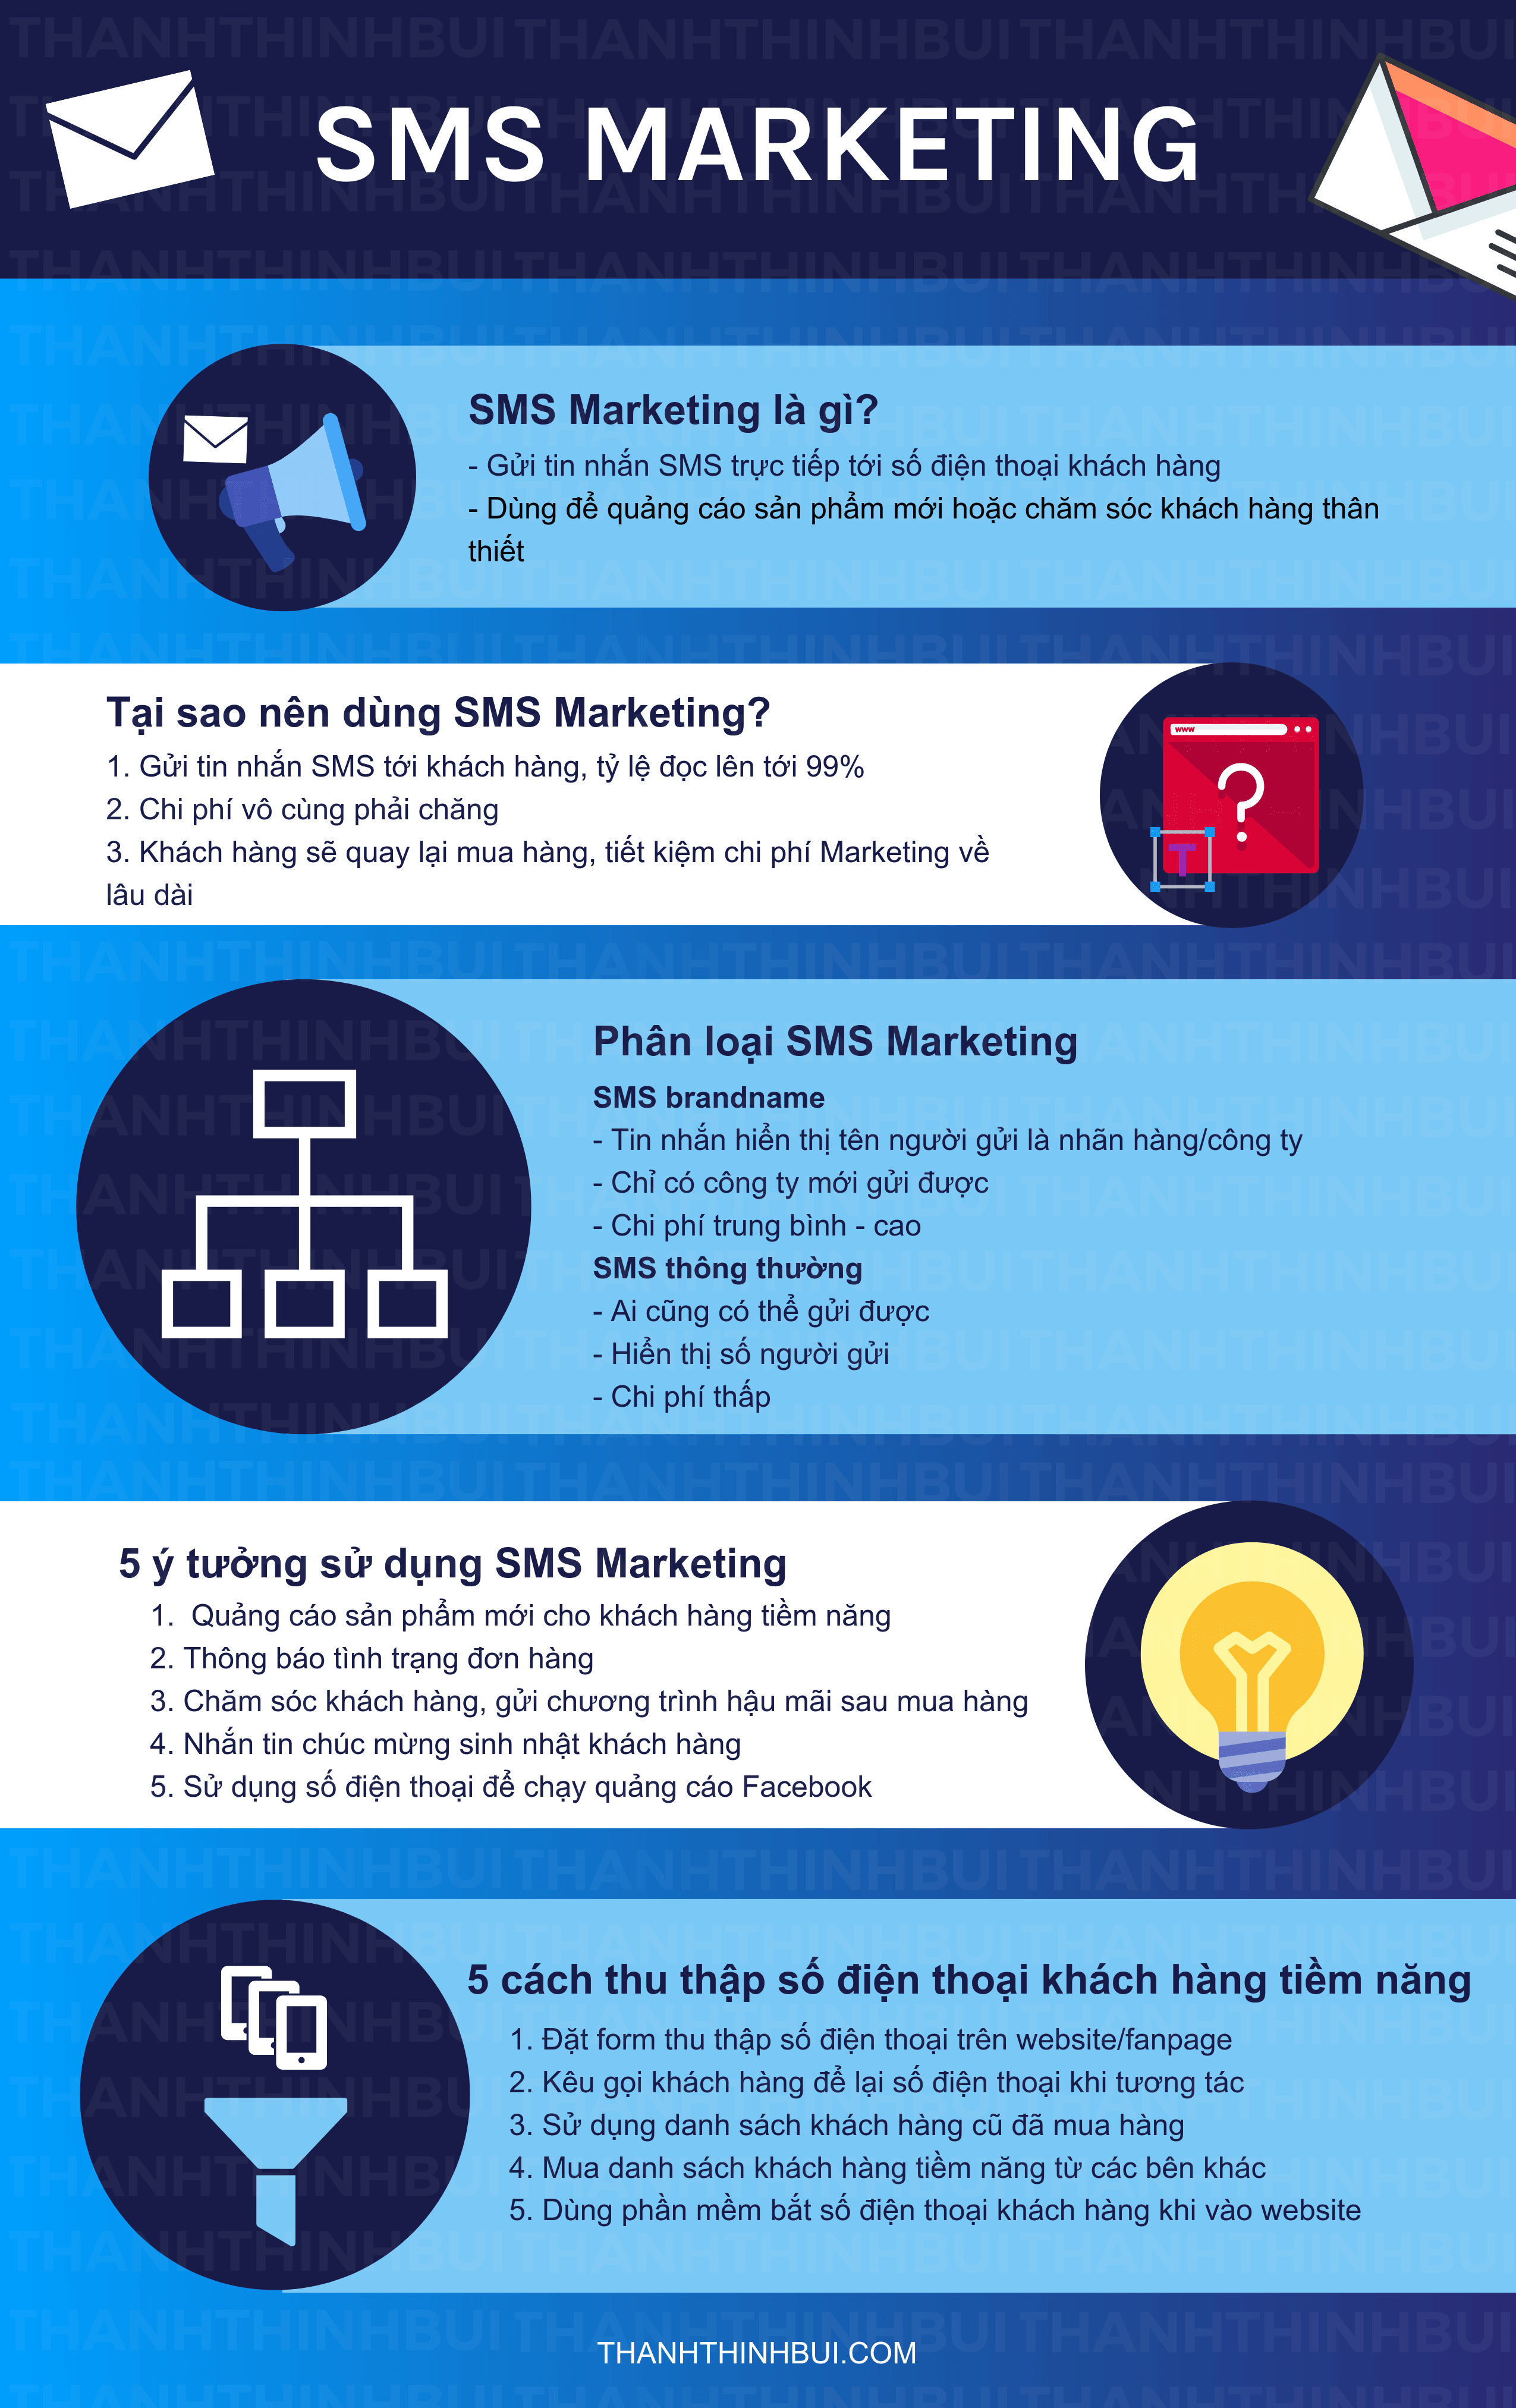 SMS-MARKETING-infographic